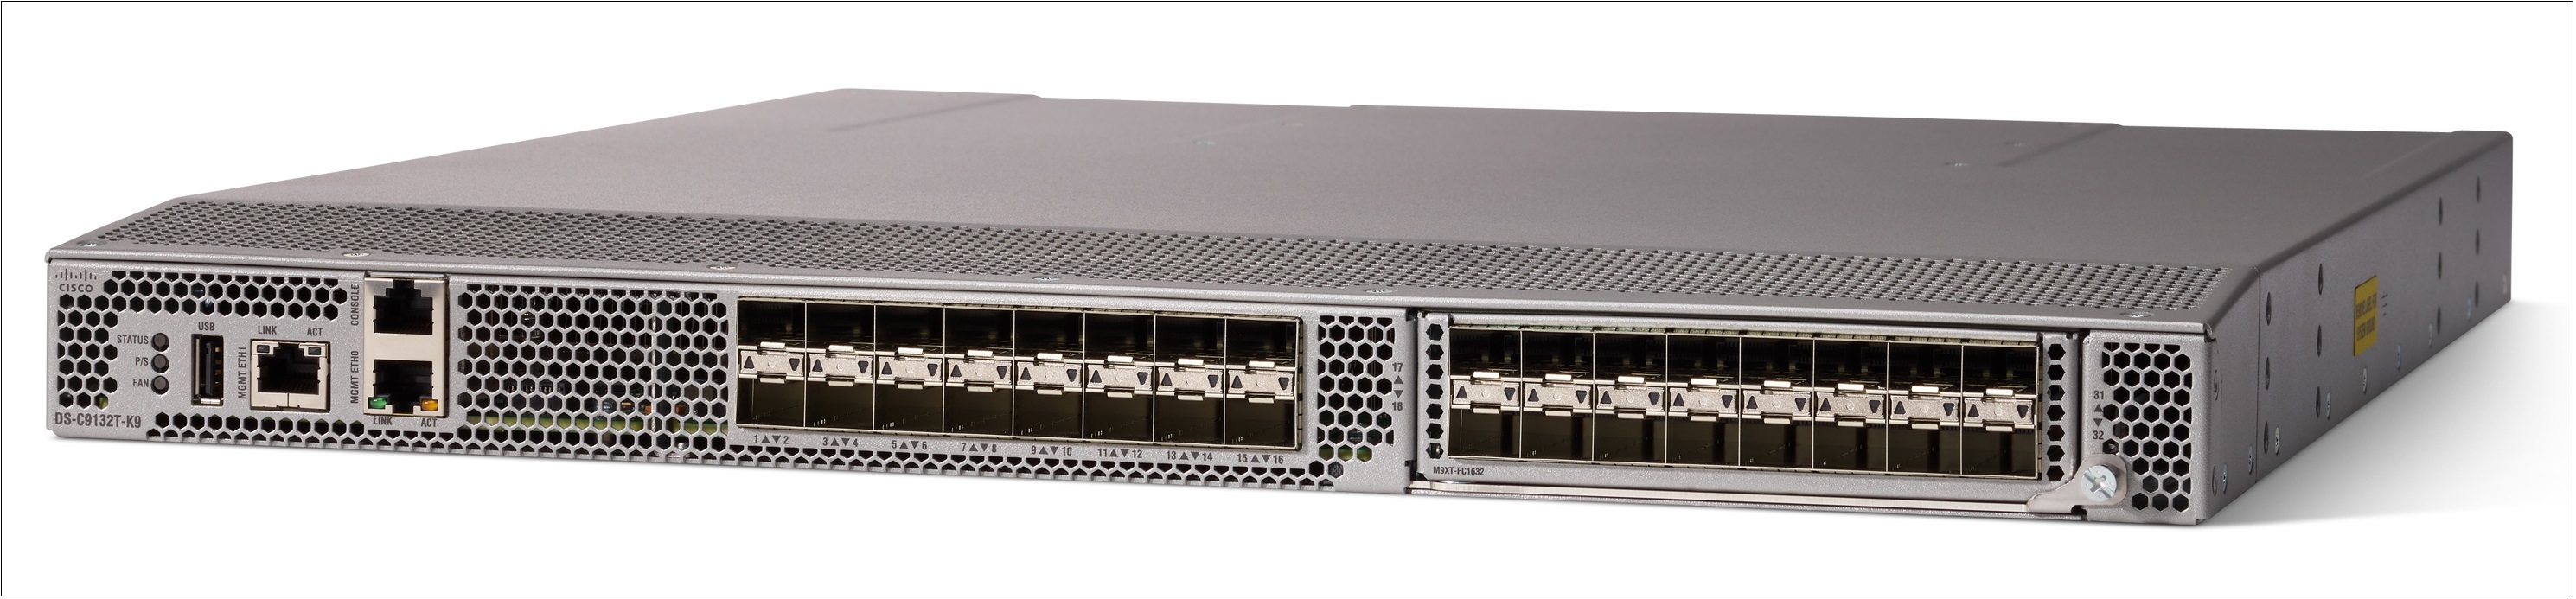 Picture of the back of the Cisco MDS 9132T 32-Gbps 32-Port Fibre Channel Switch.